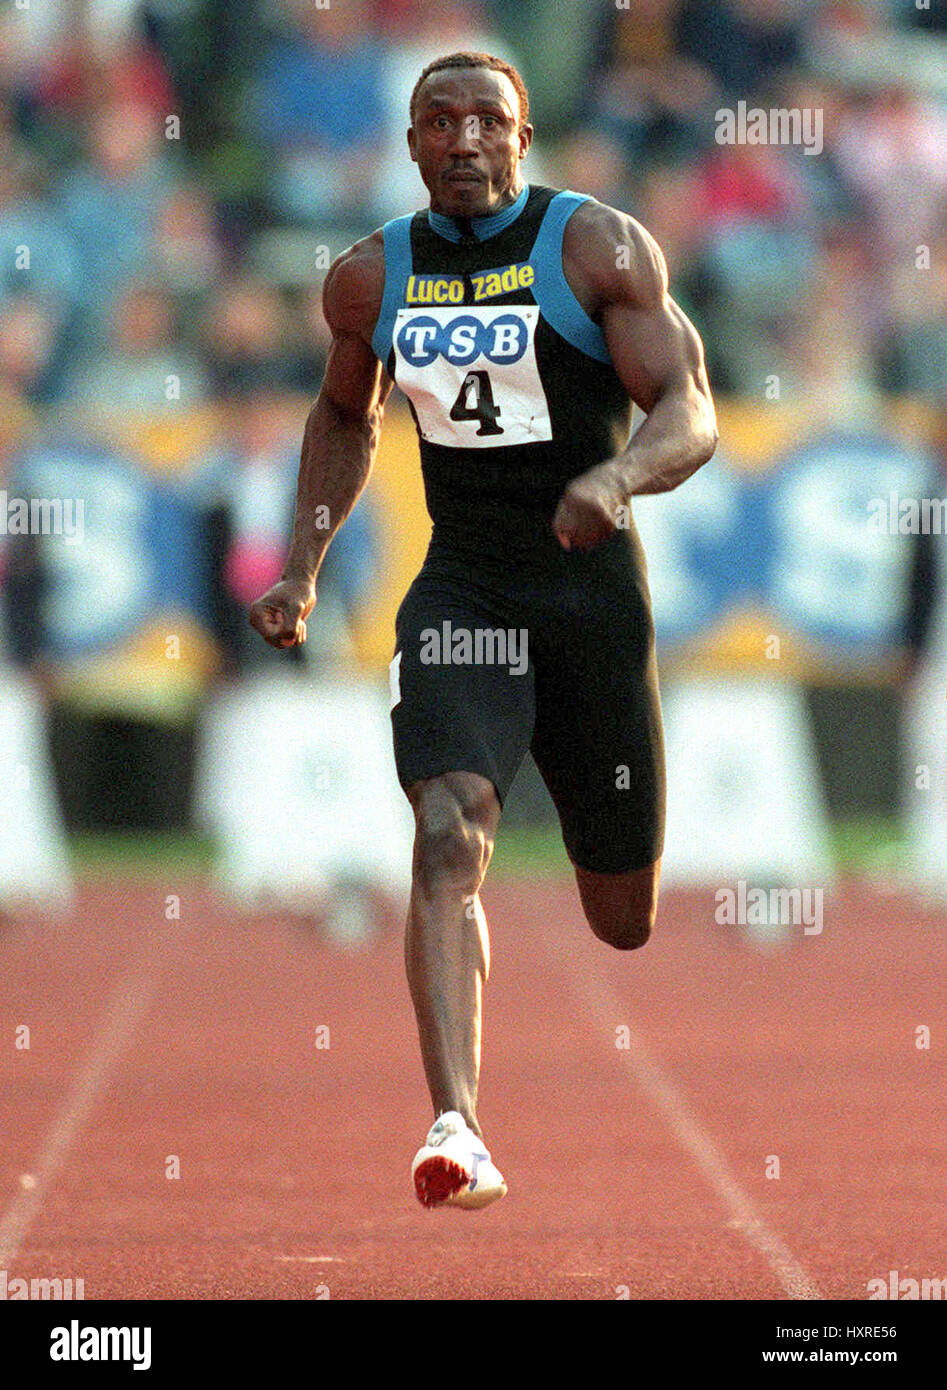 LINFORD CHRISTIE 100 METRES 23 July 1994 Stock Photo